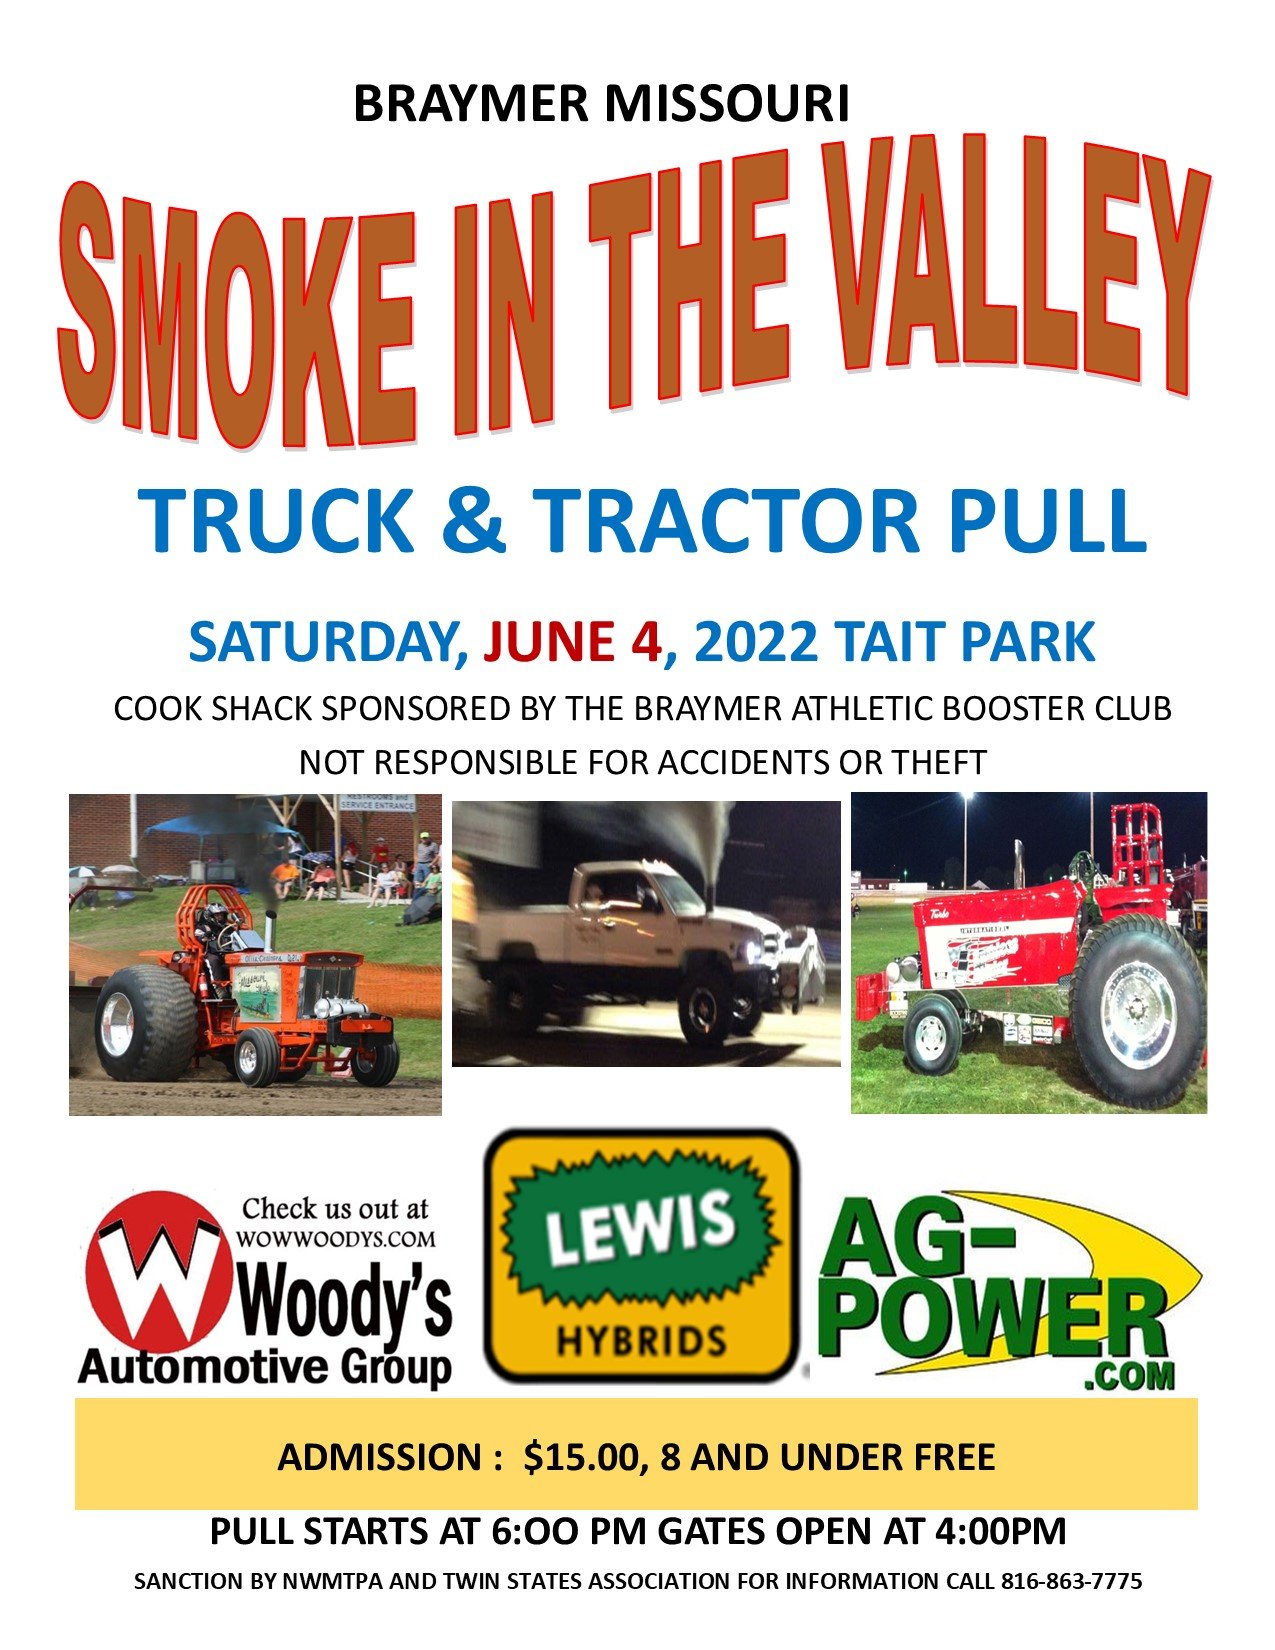 Smoke in the Valley Truck & Tractor Pull